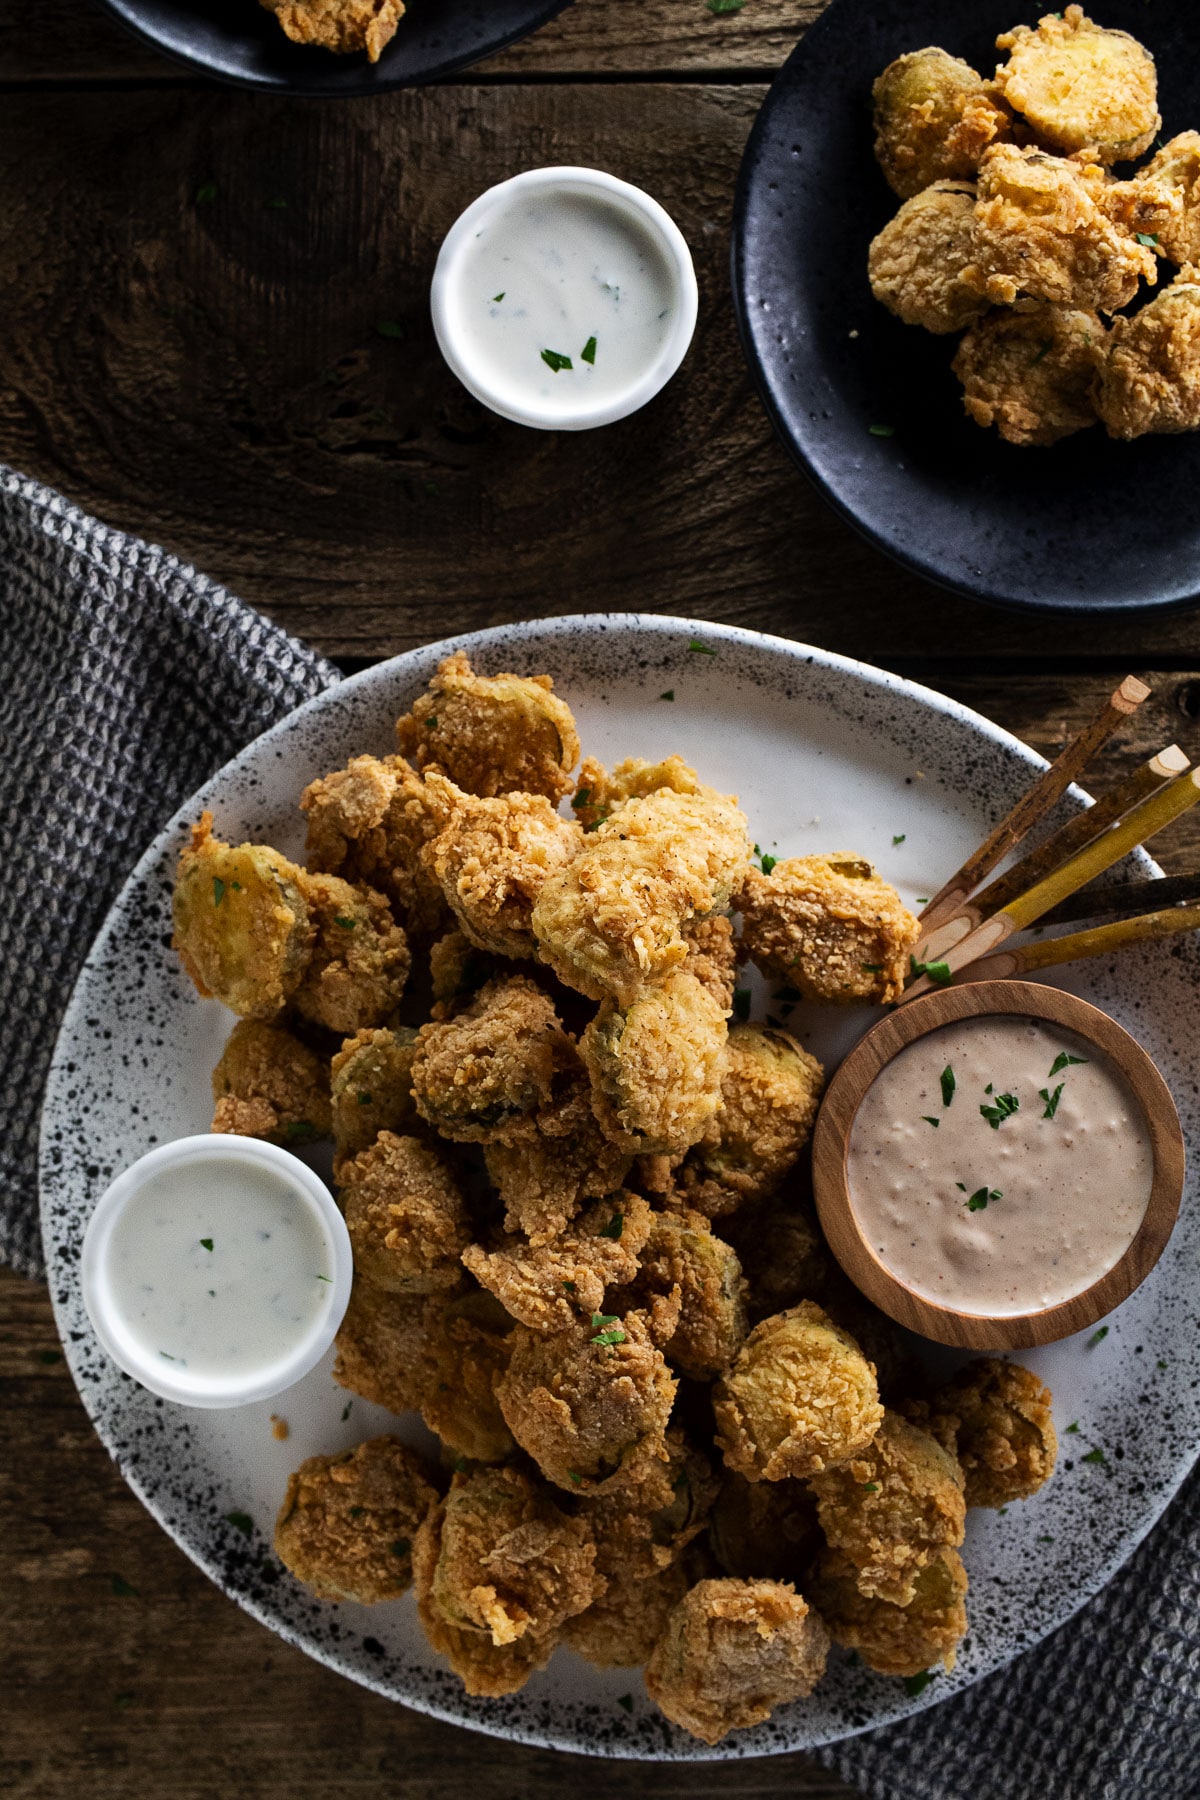 This is an image of our better than Texas Roadhouse fried pickles recipe.